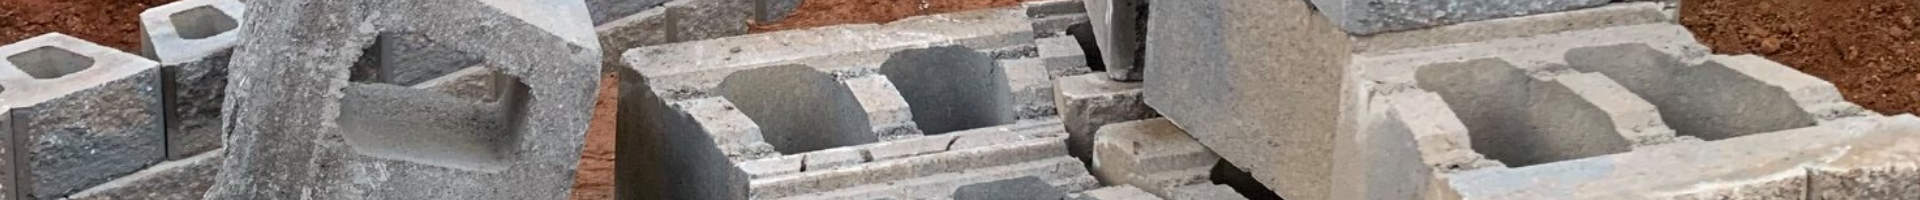 concrete elements used for basement waterproofing